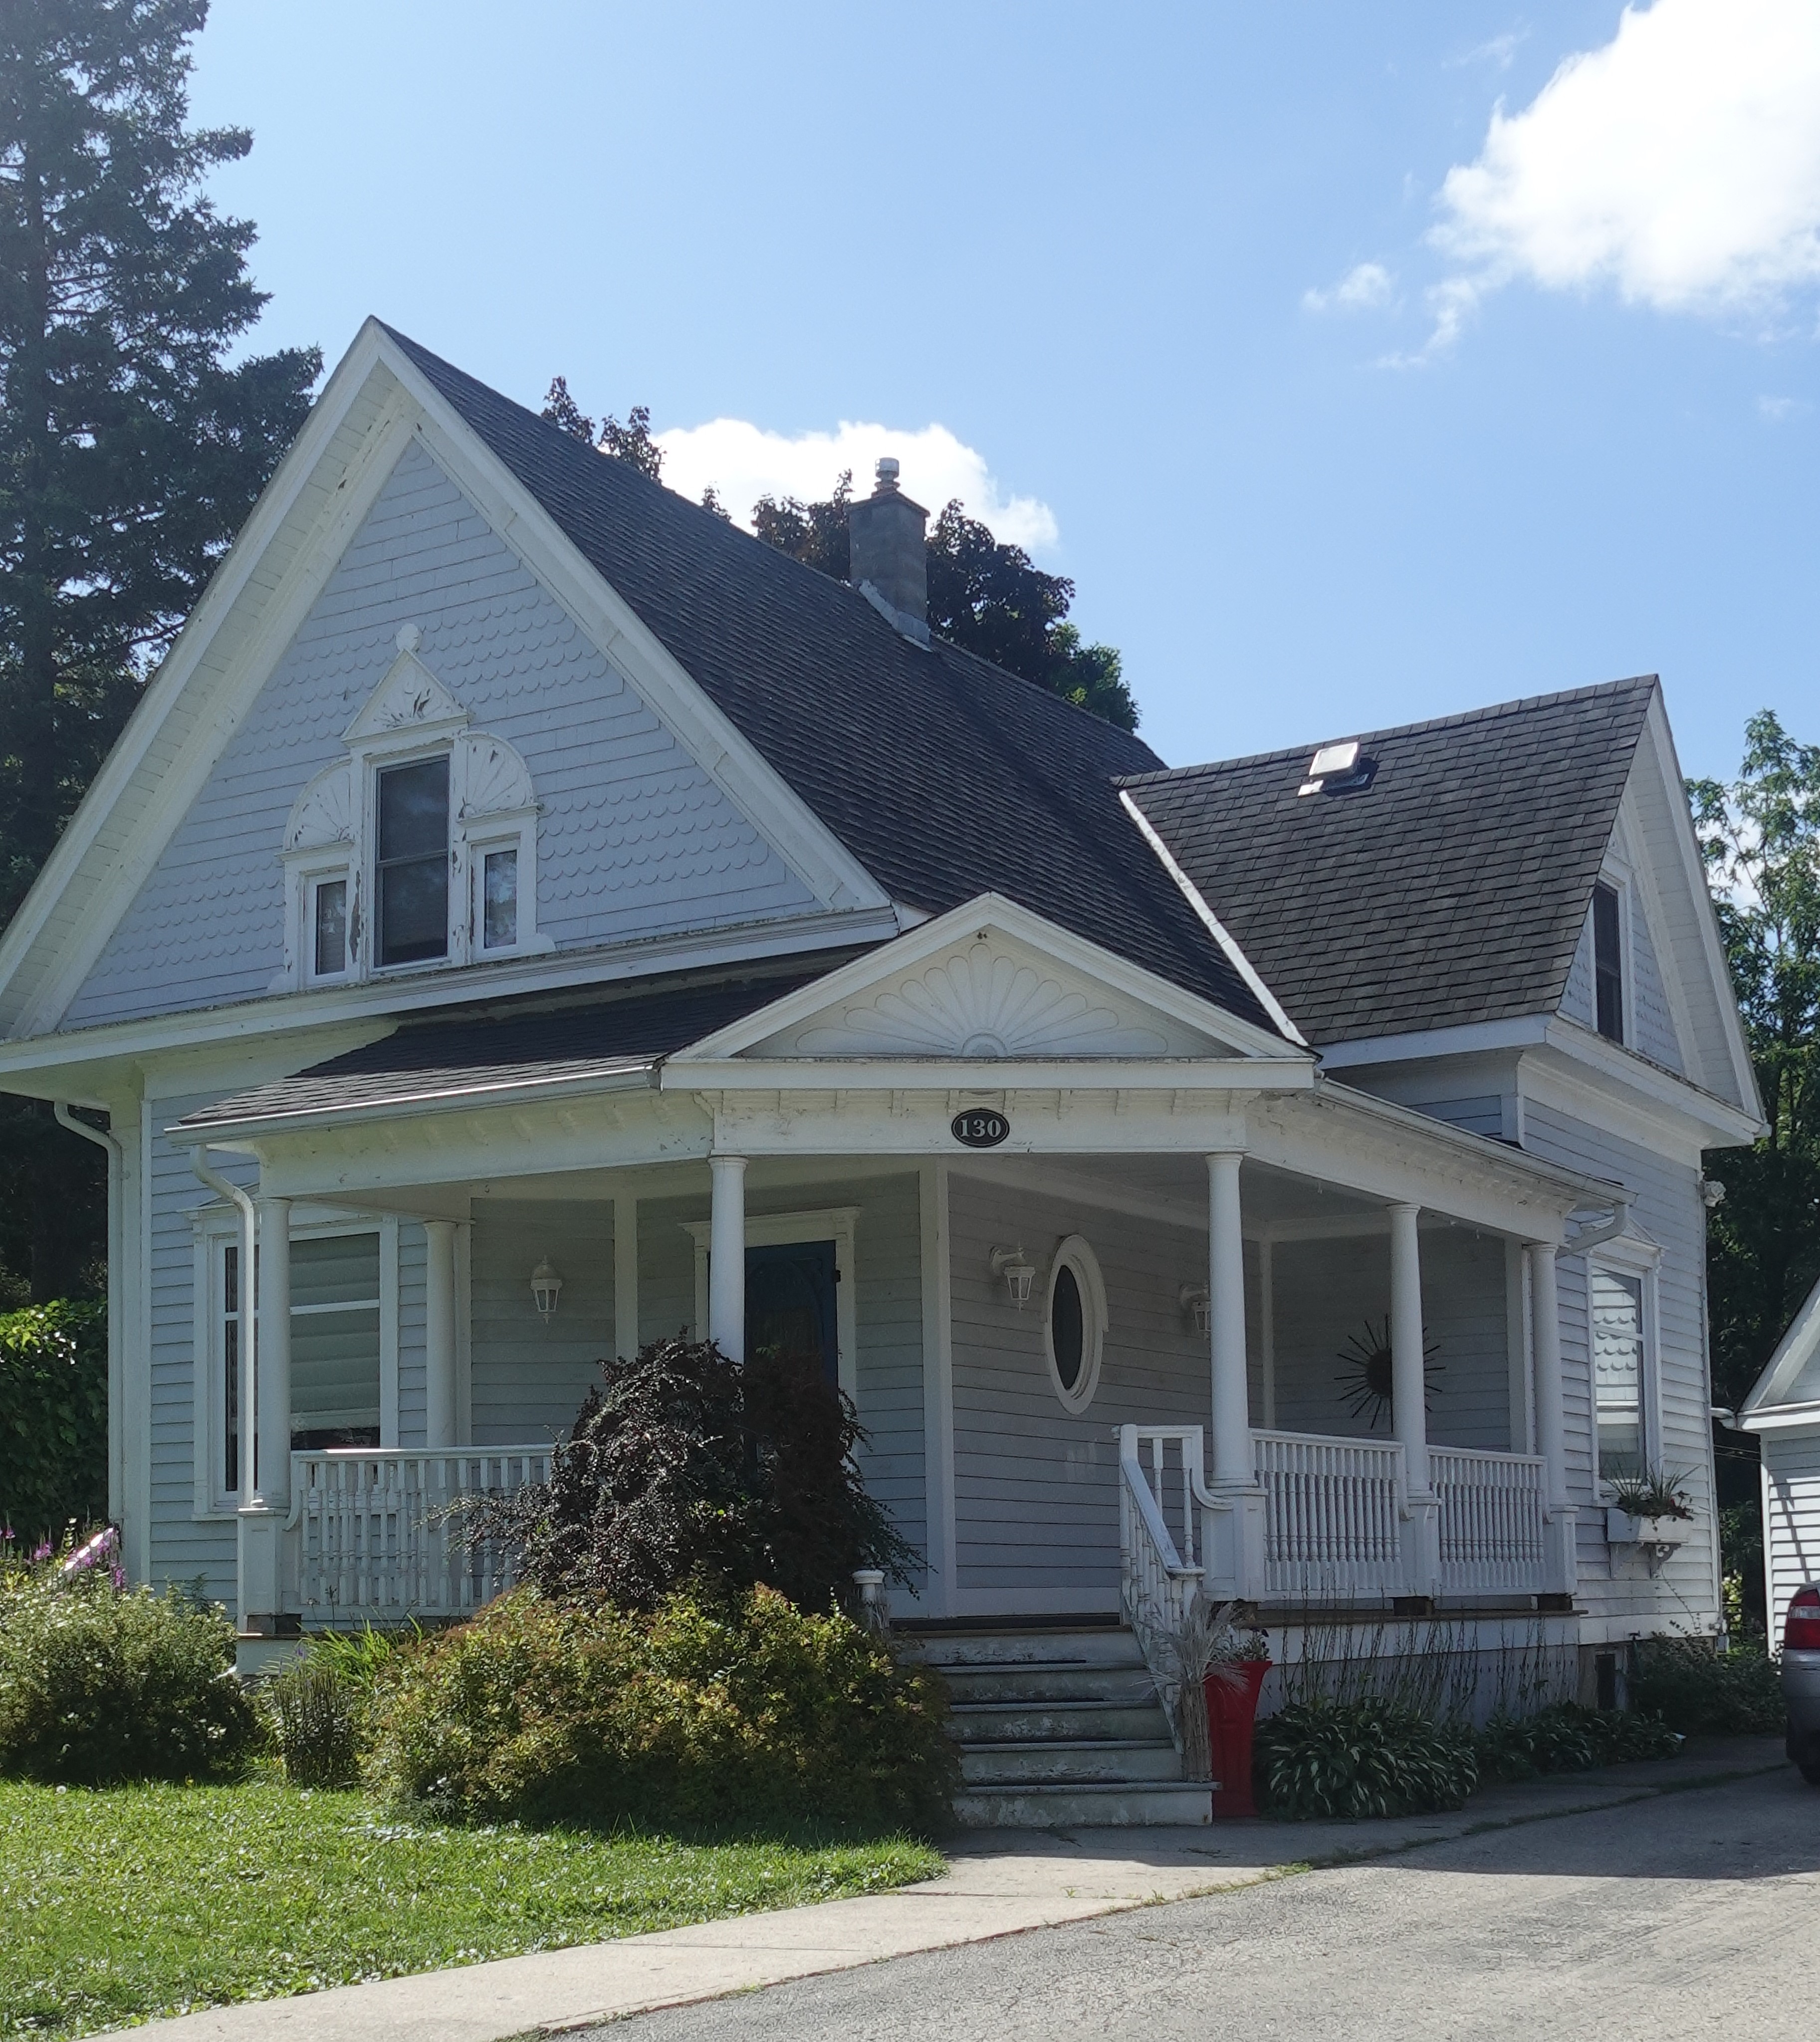 A photo of the McInnis House in Wingham, Ontario